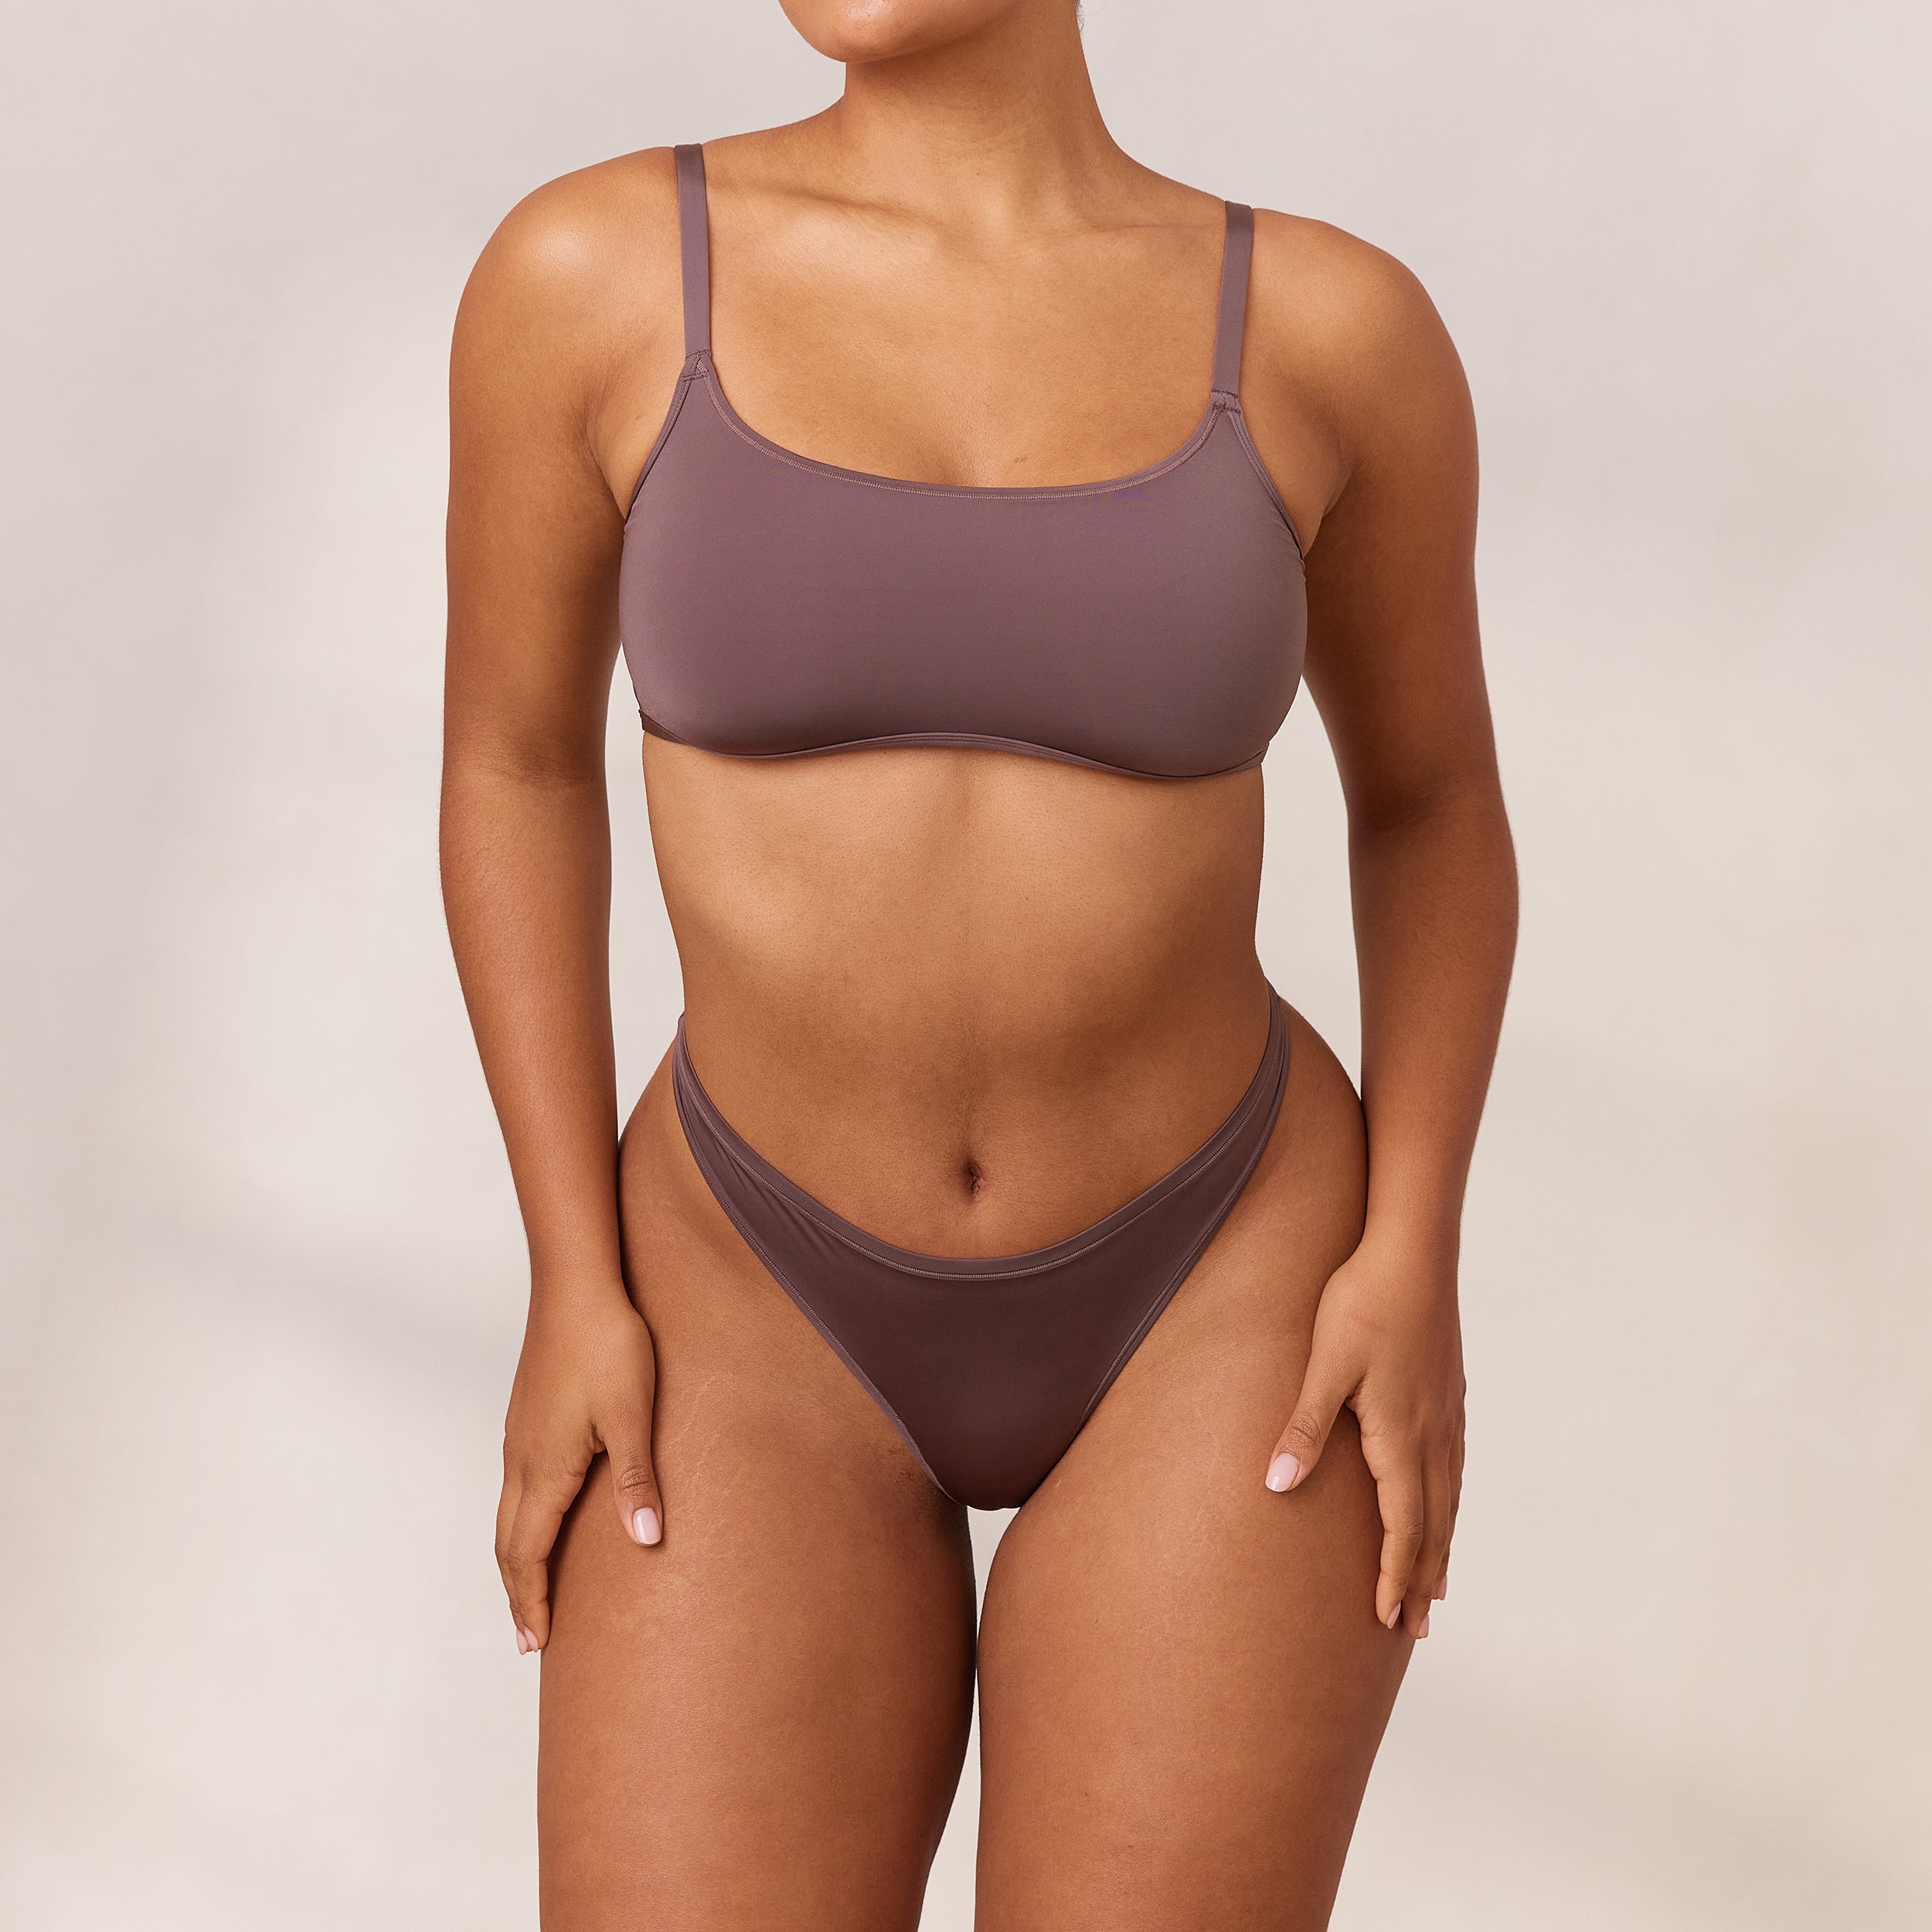 Barely There Bralette - Damson